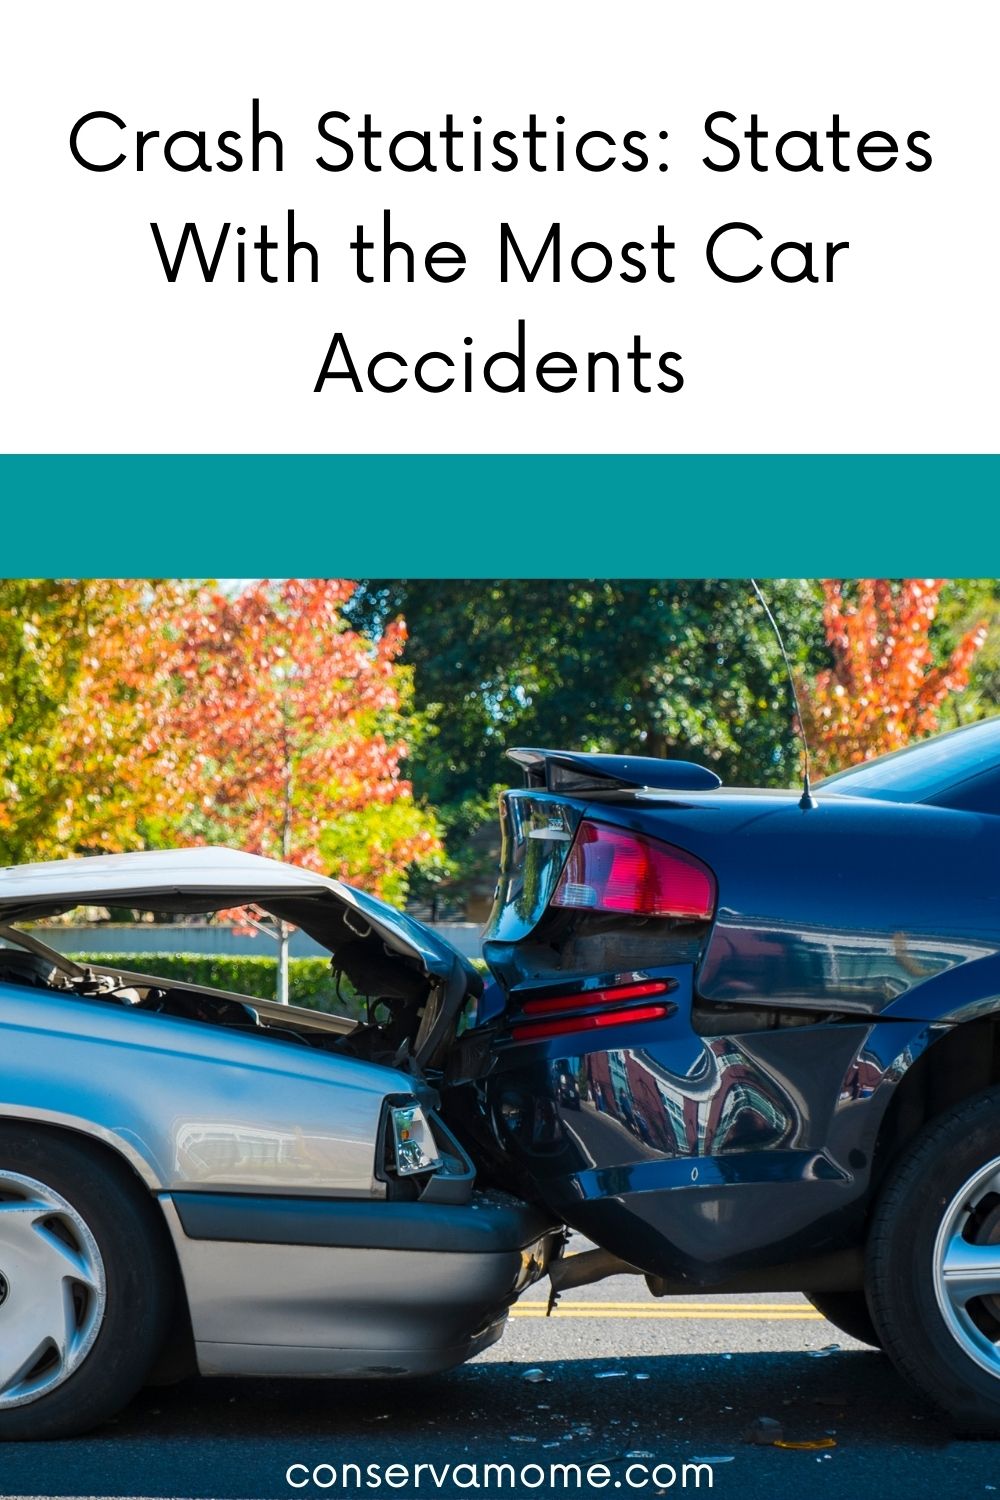 Crash Statistics States With the Most Car Accidents